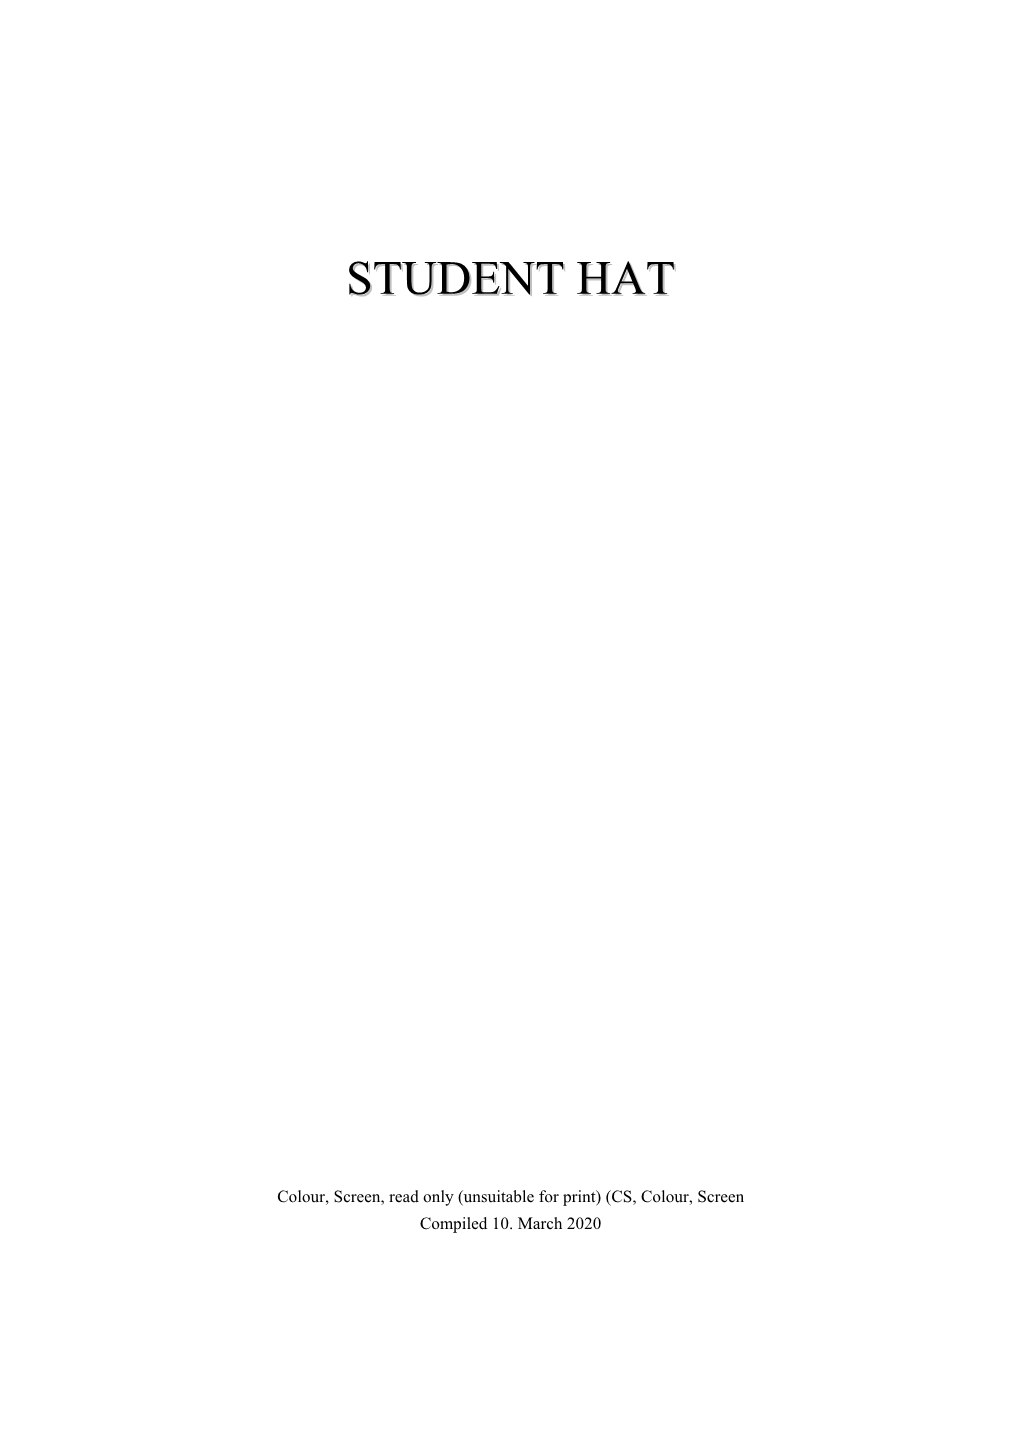 STUDENT HAT II 10.03.20 A) Table of Contents, in Checksheet Order